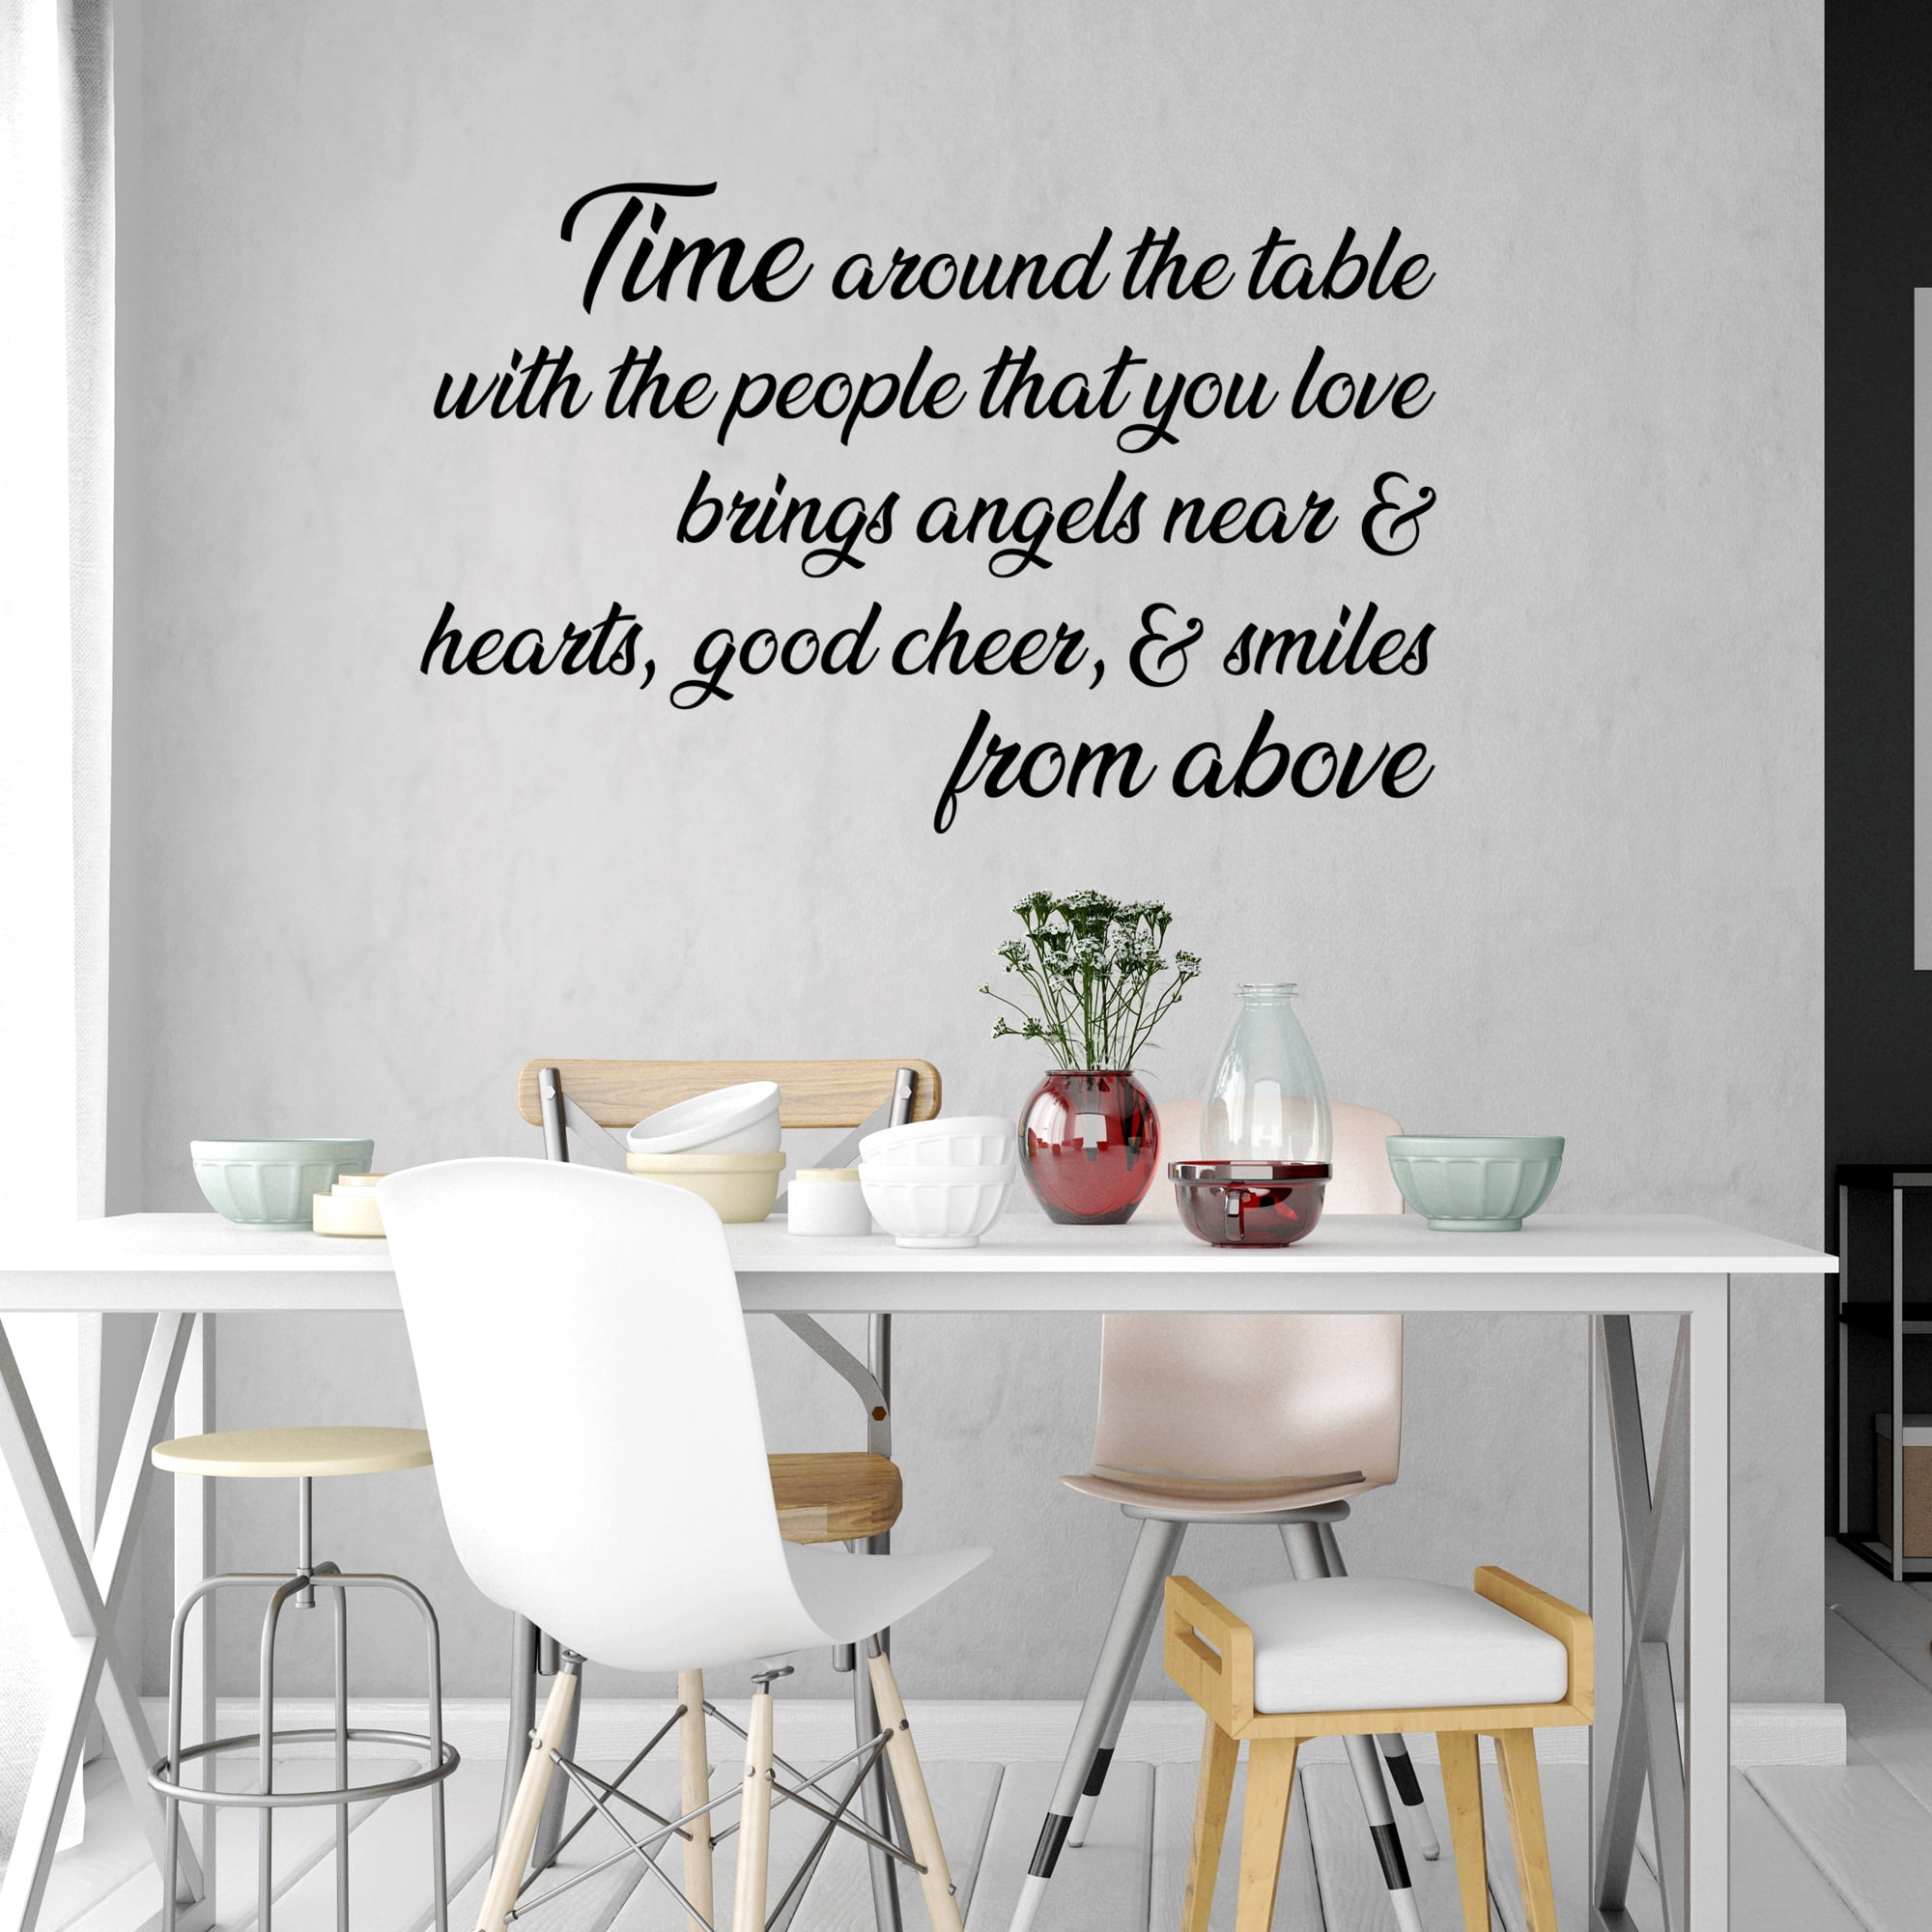 Dinner is Ready Funny Humorous Decal Dining Cafe Kitchen Wall Sticker Quote 